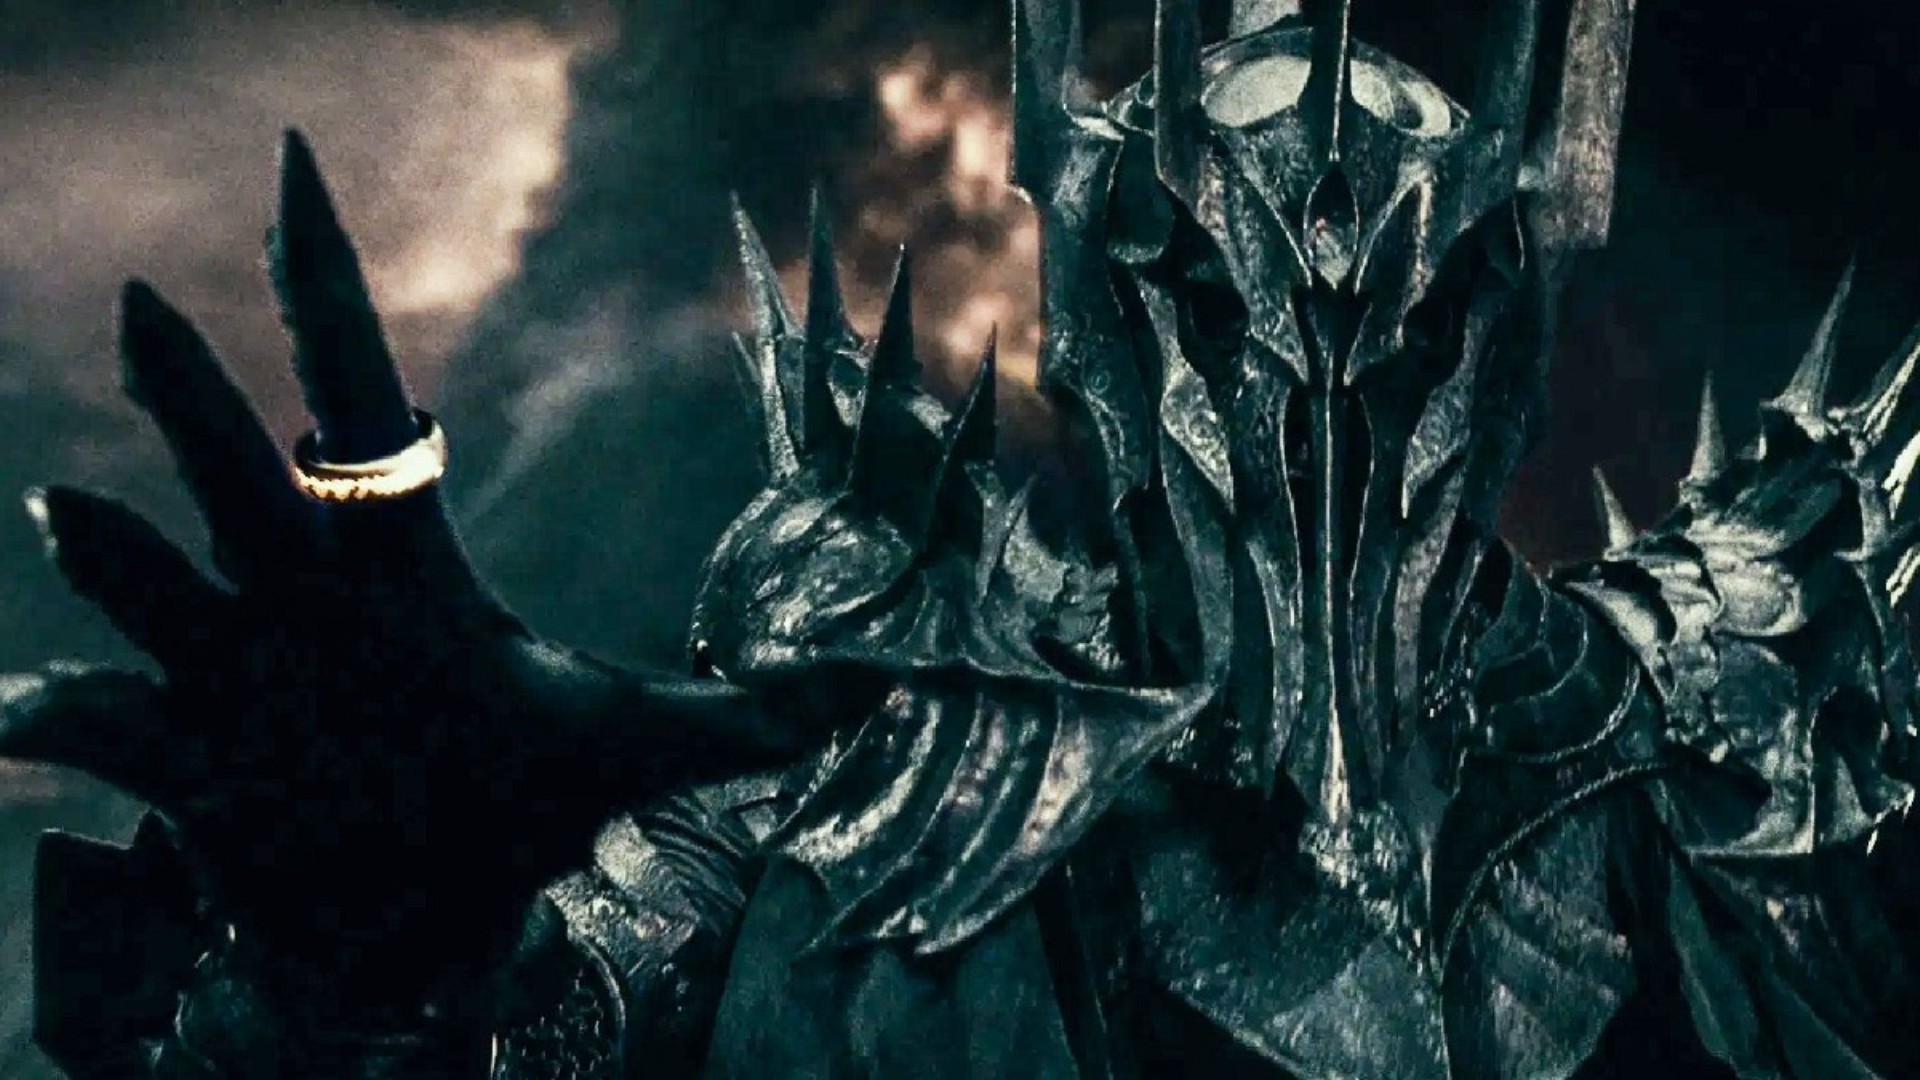 Sauron in Lord of the Rings